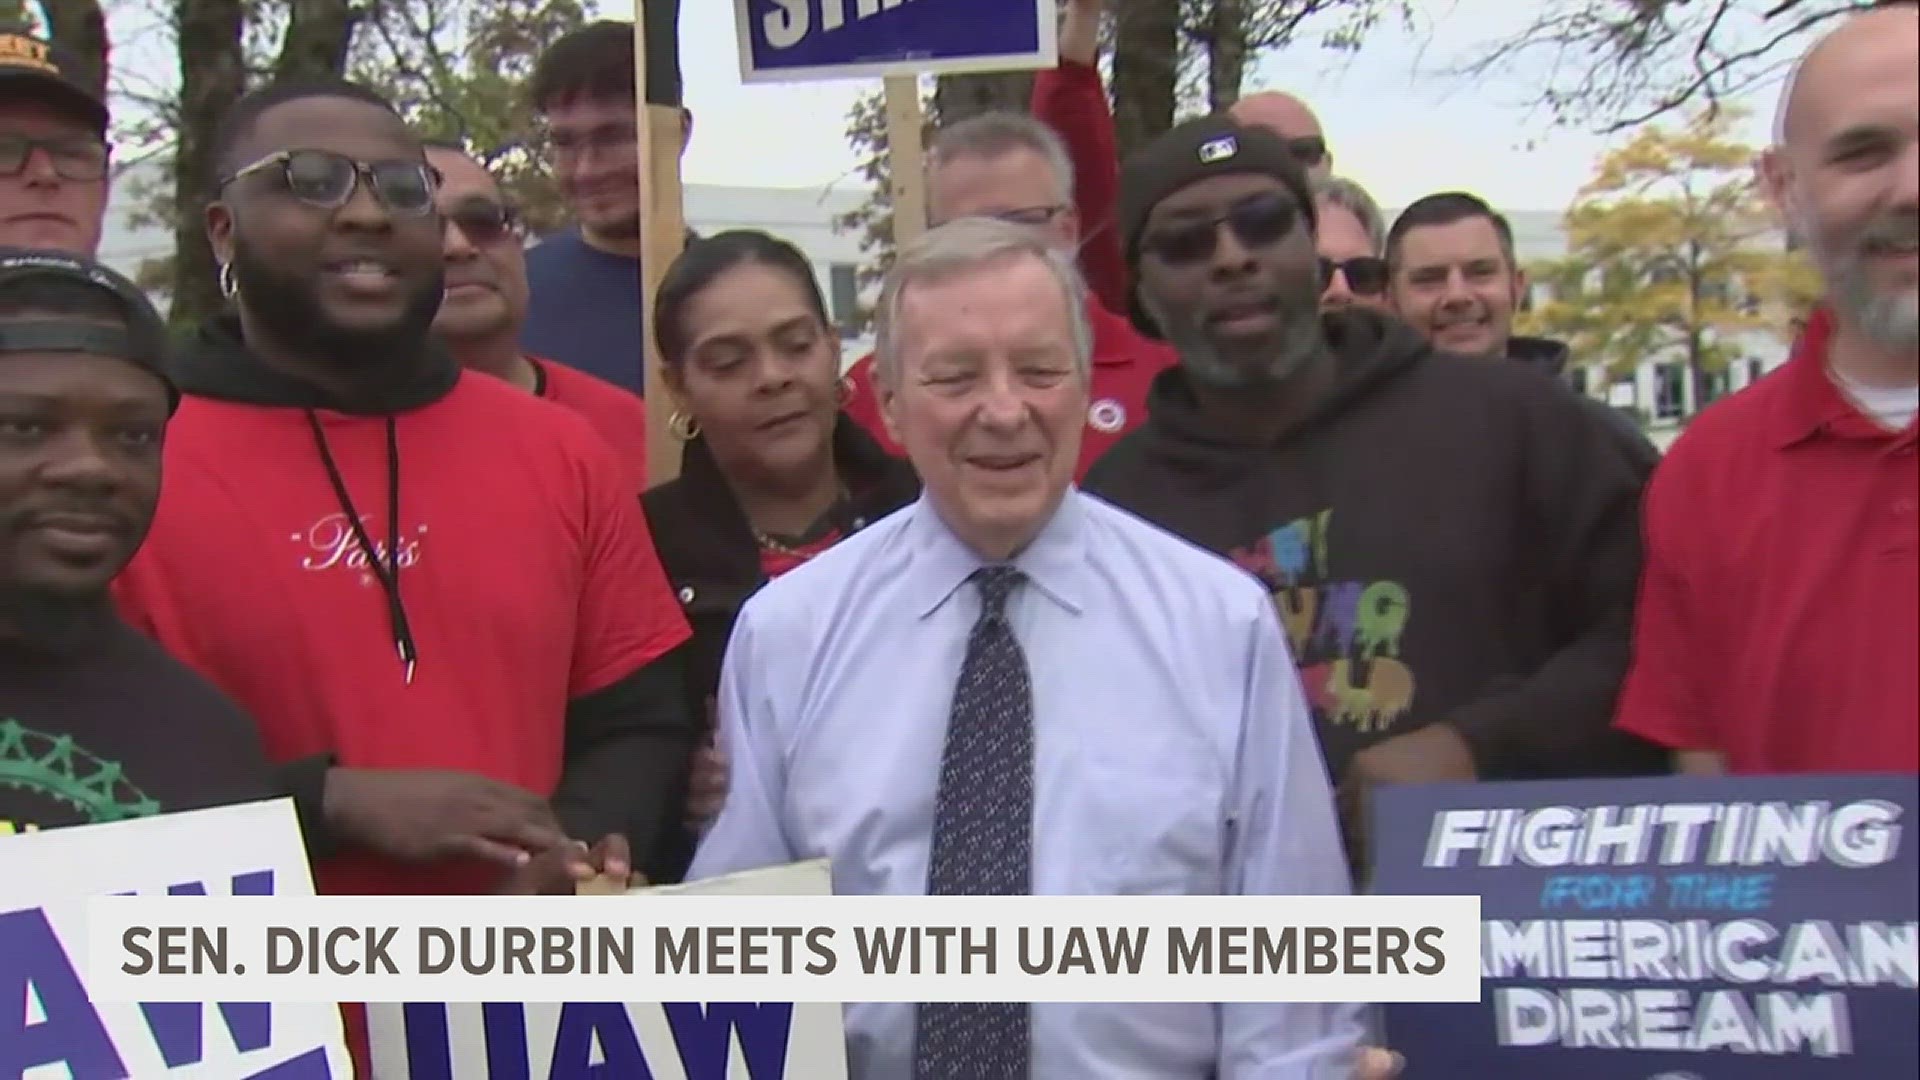 As the UAW expands their strike, Illinois senator Dick Durbin was seen meeting with workers in Boilingbrook, Ill.